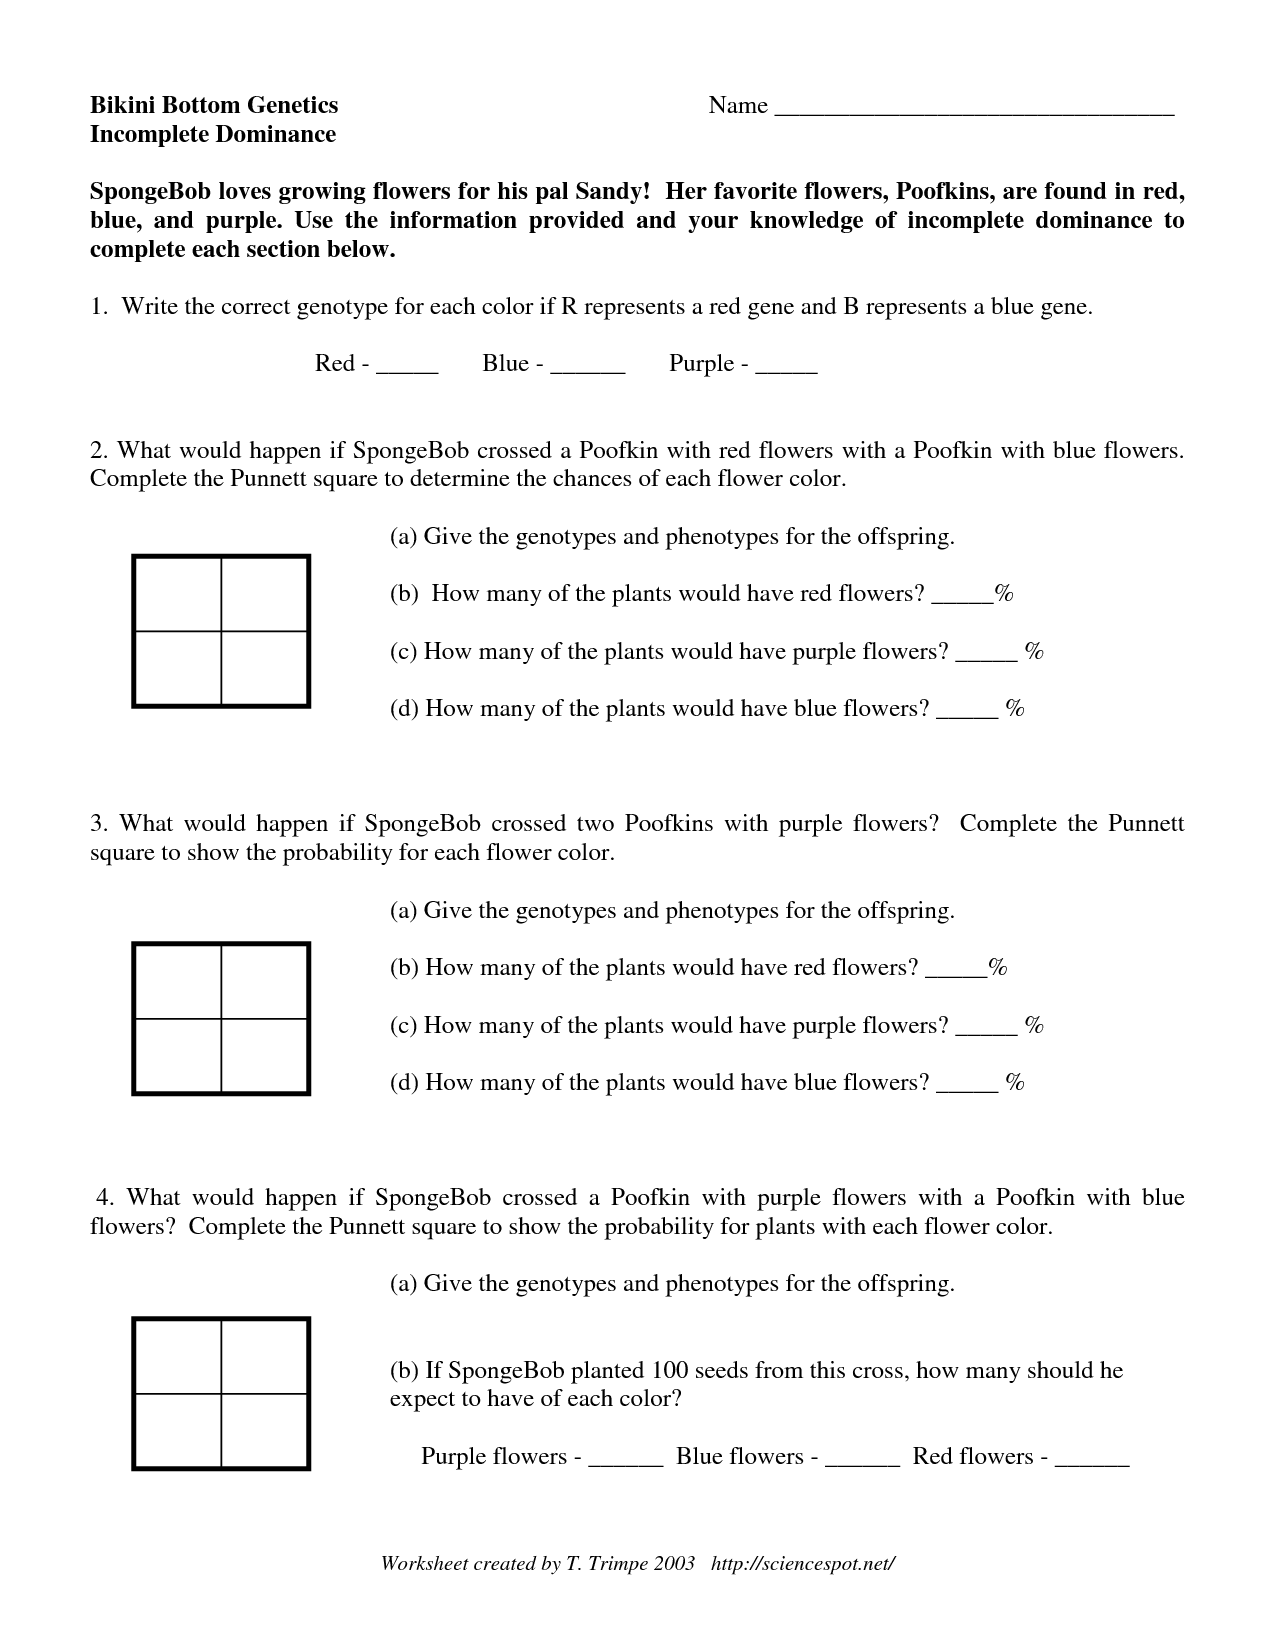 16 Best Images of Incomplete And Codominance Worksheet Answers  Incomplete and Codominance 